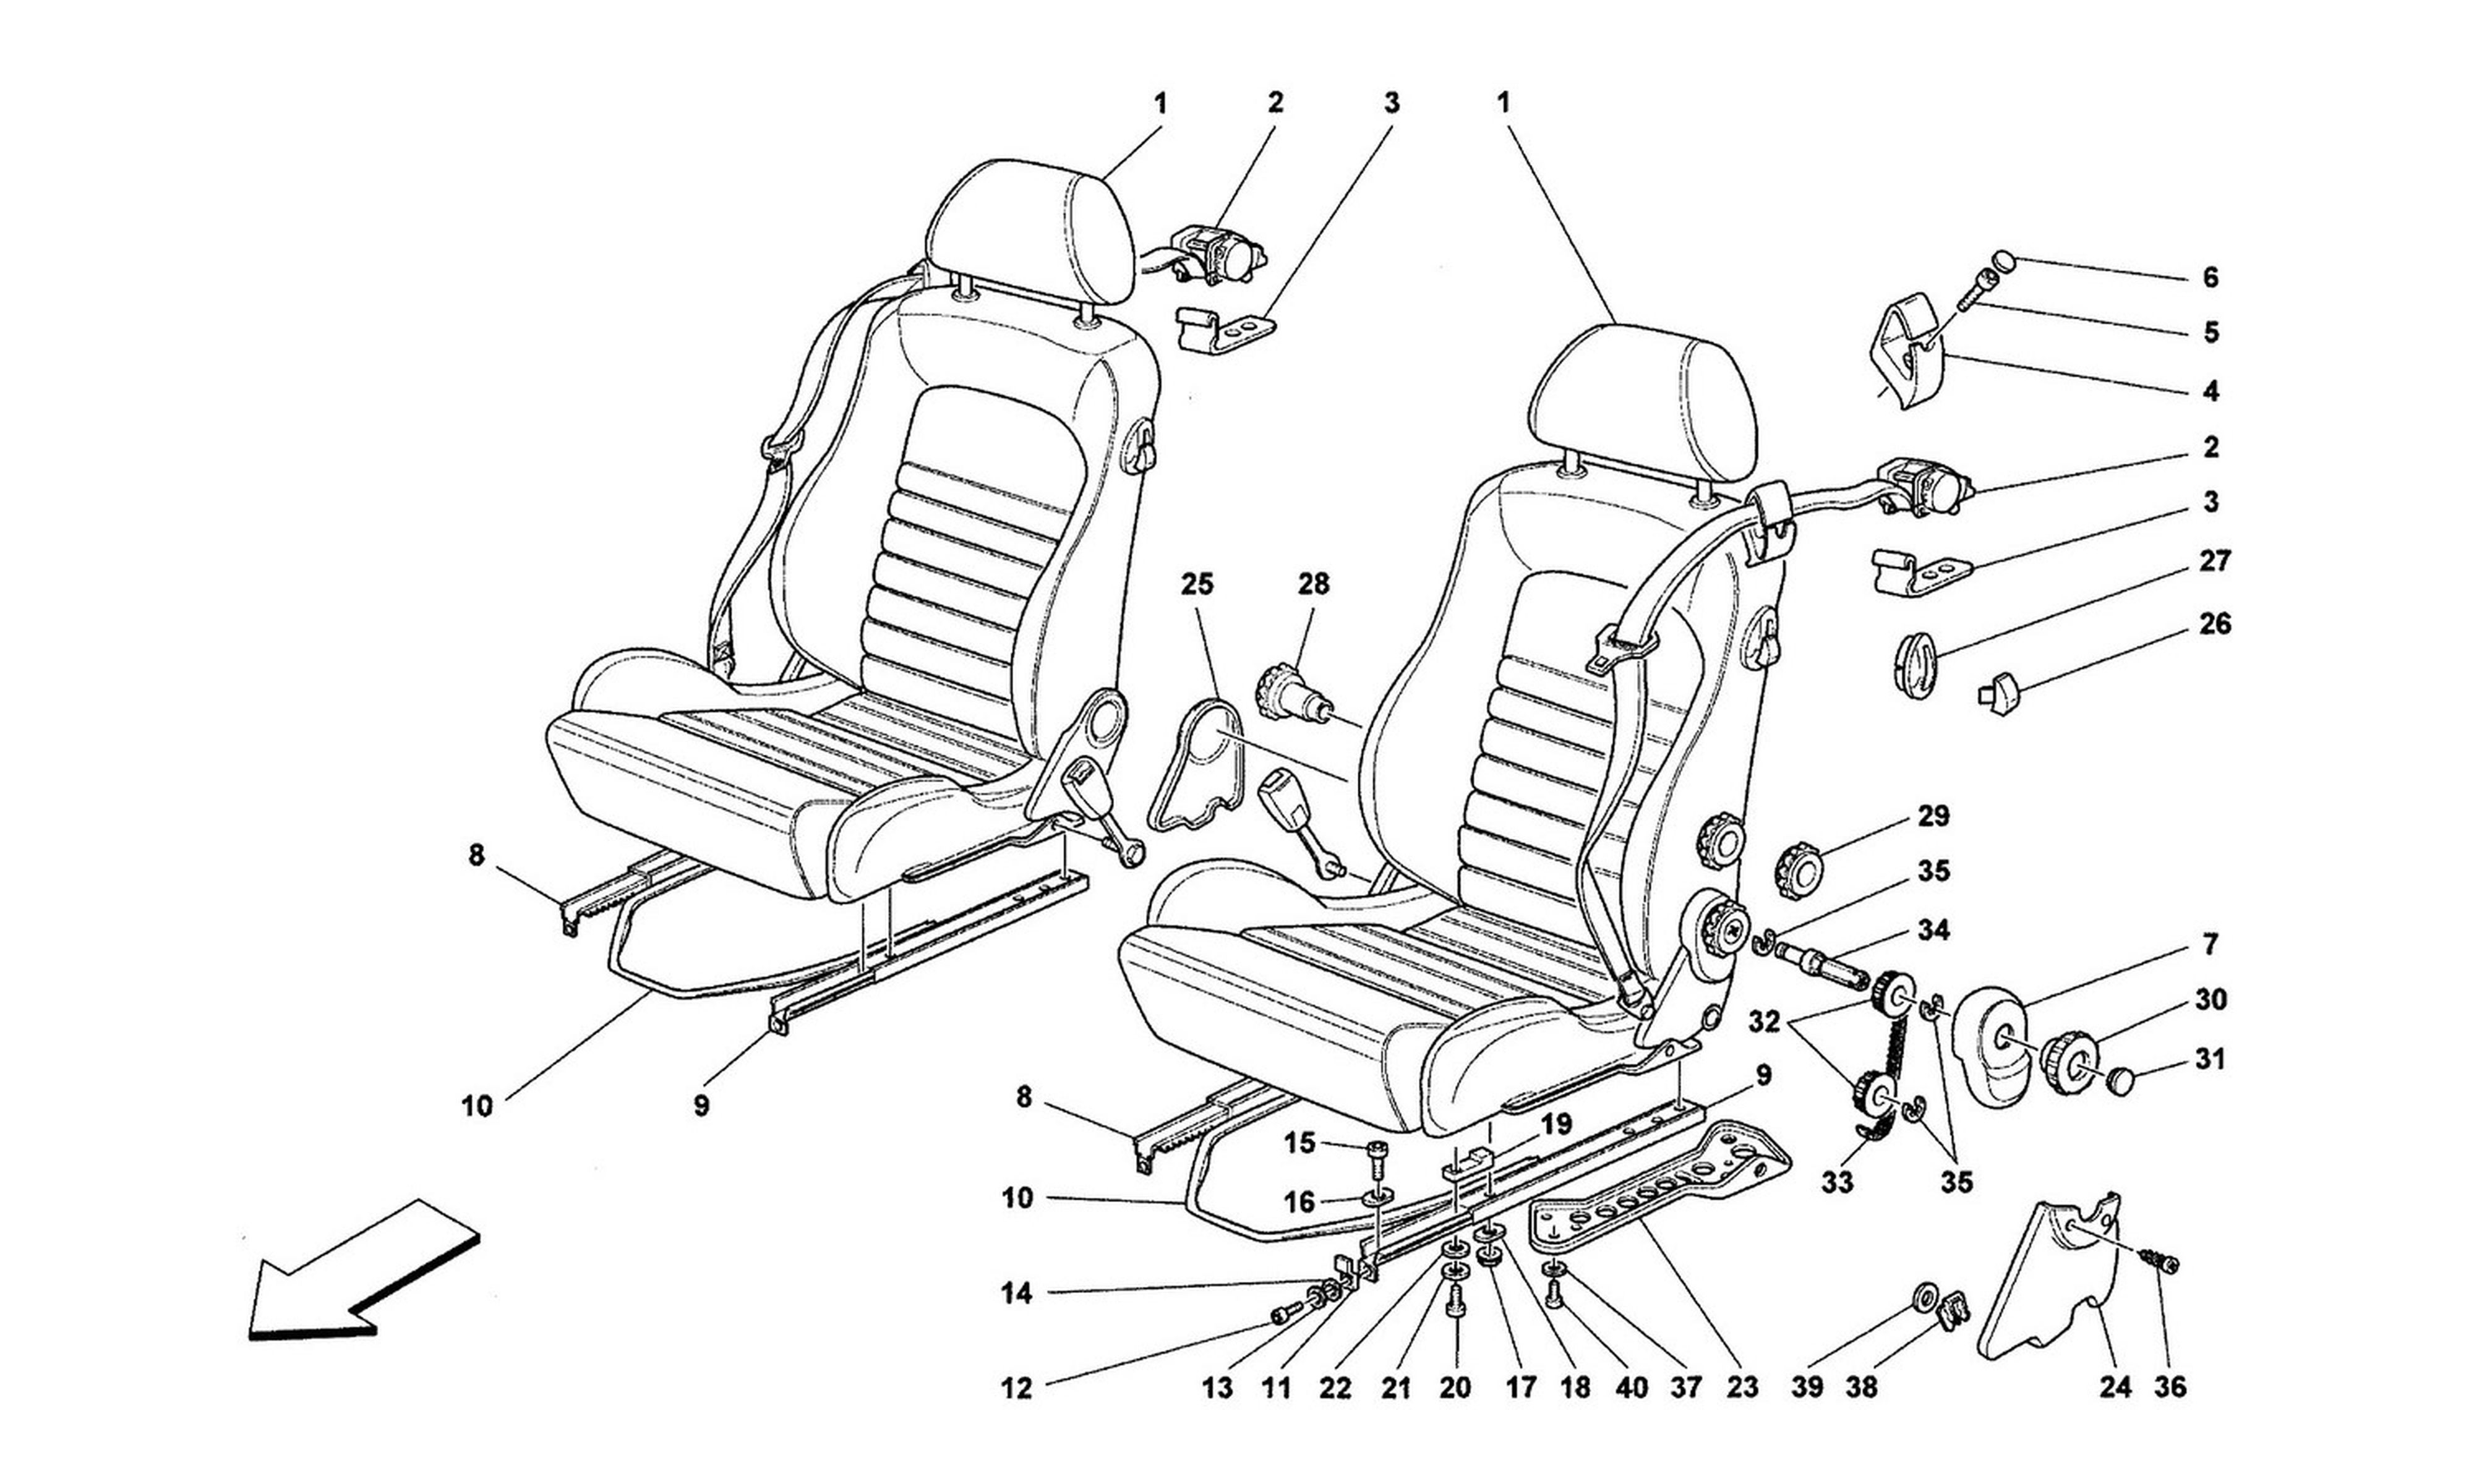 Schematic: Seats And Safety Belts -Comfort-Not For Spider-